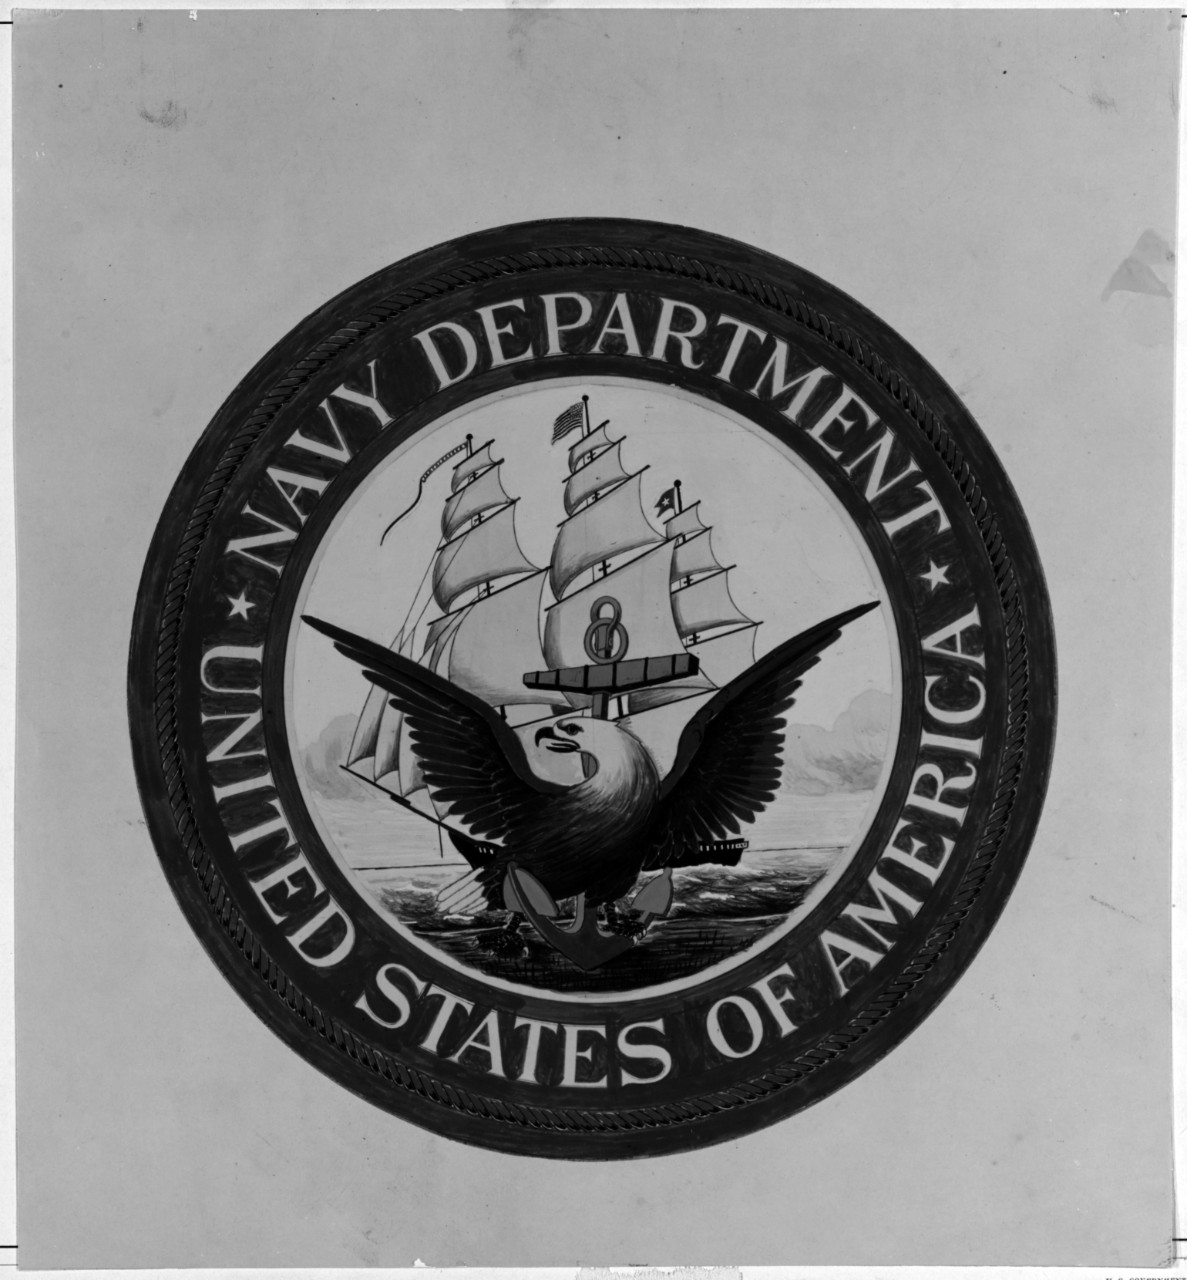 Navy Department Seal, adopted in 1850 and unchanged until 1957. 